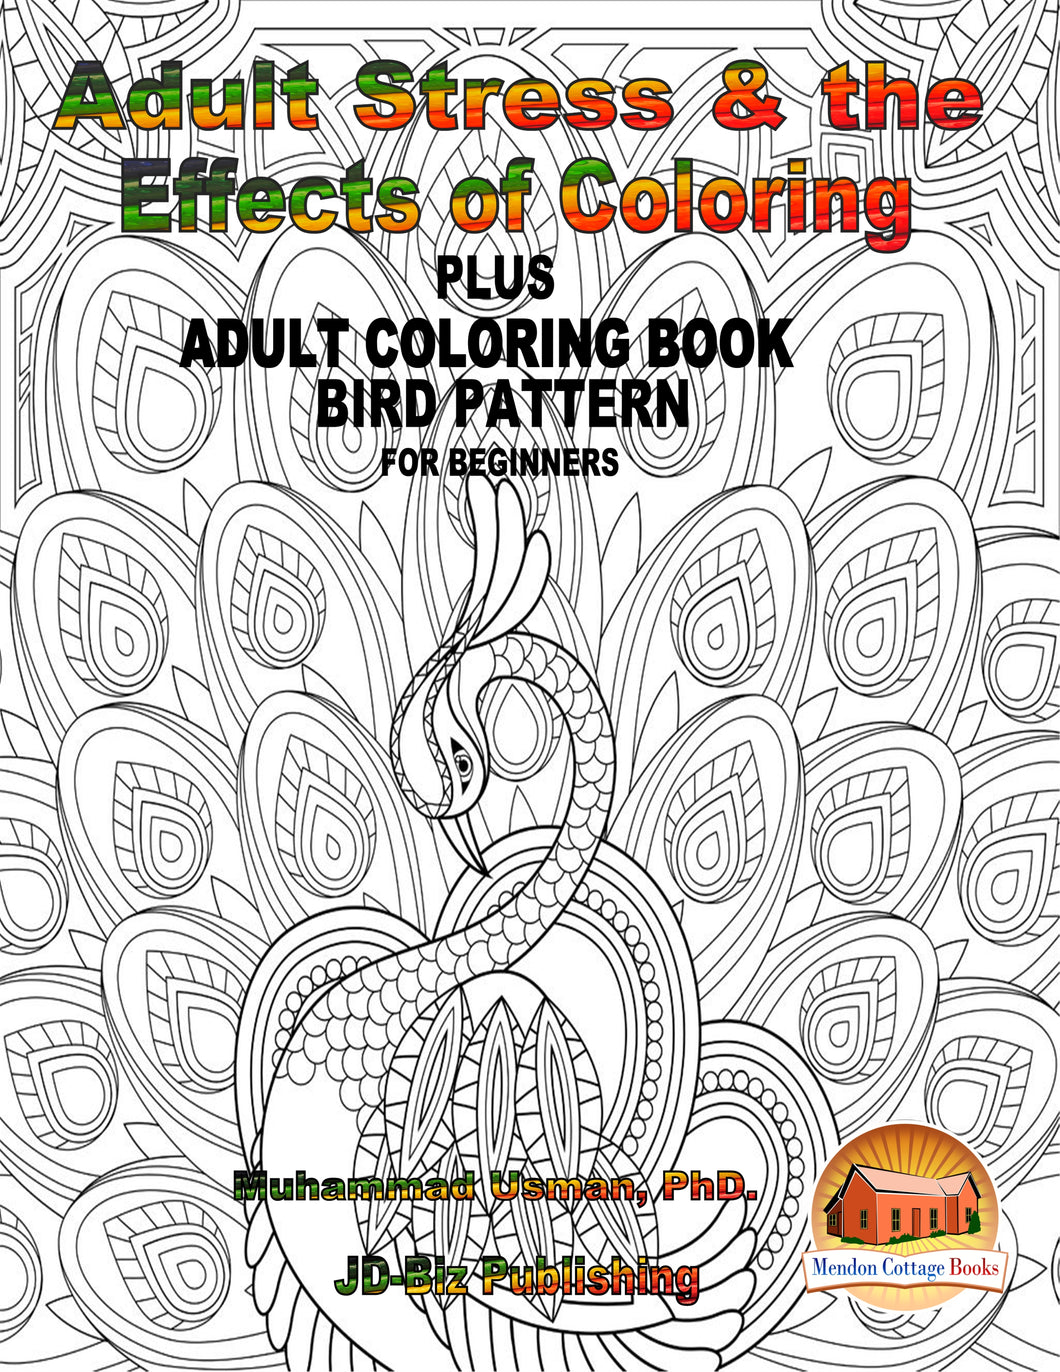 Adult Stress & the Effects of Coloring Plus - Adult Coloring Book - Bird Pattern For Beginners